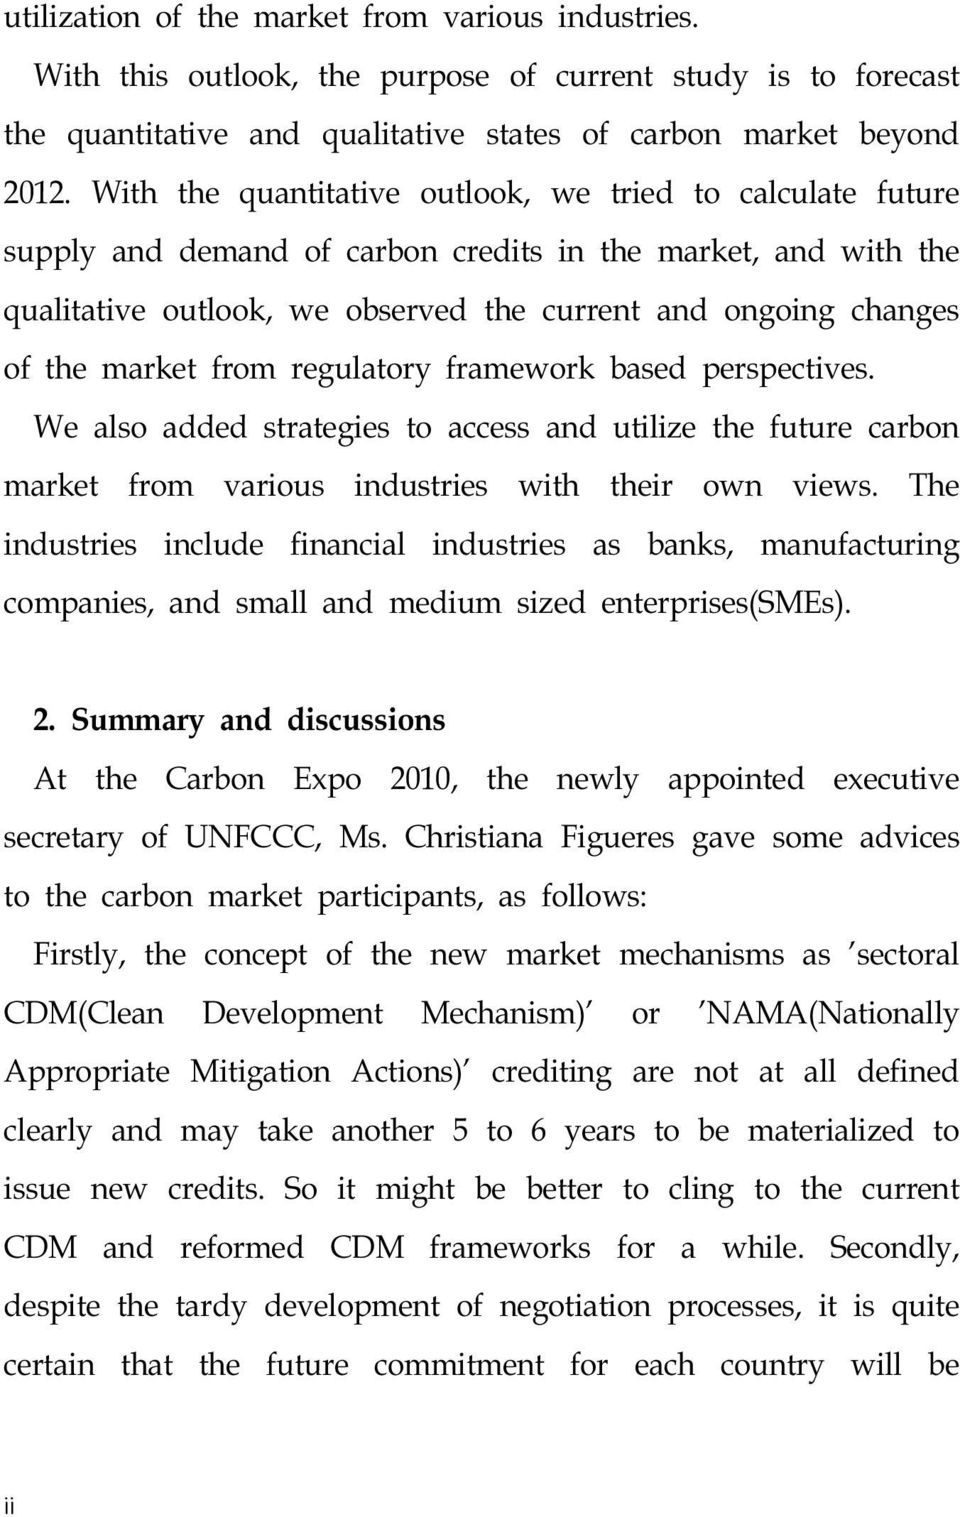 market from regulatory framework based perspectives. We also added strategies to access and utilize the future carbon market from various industries with their own views.